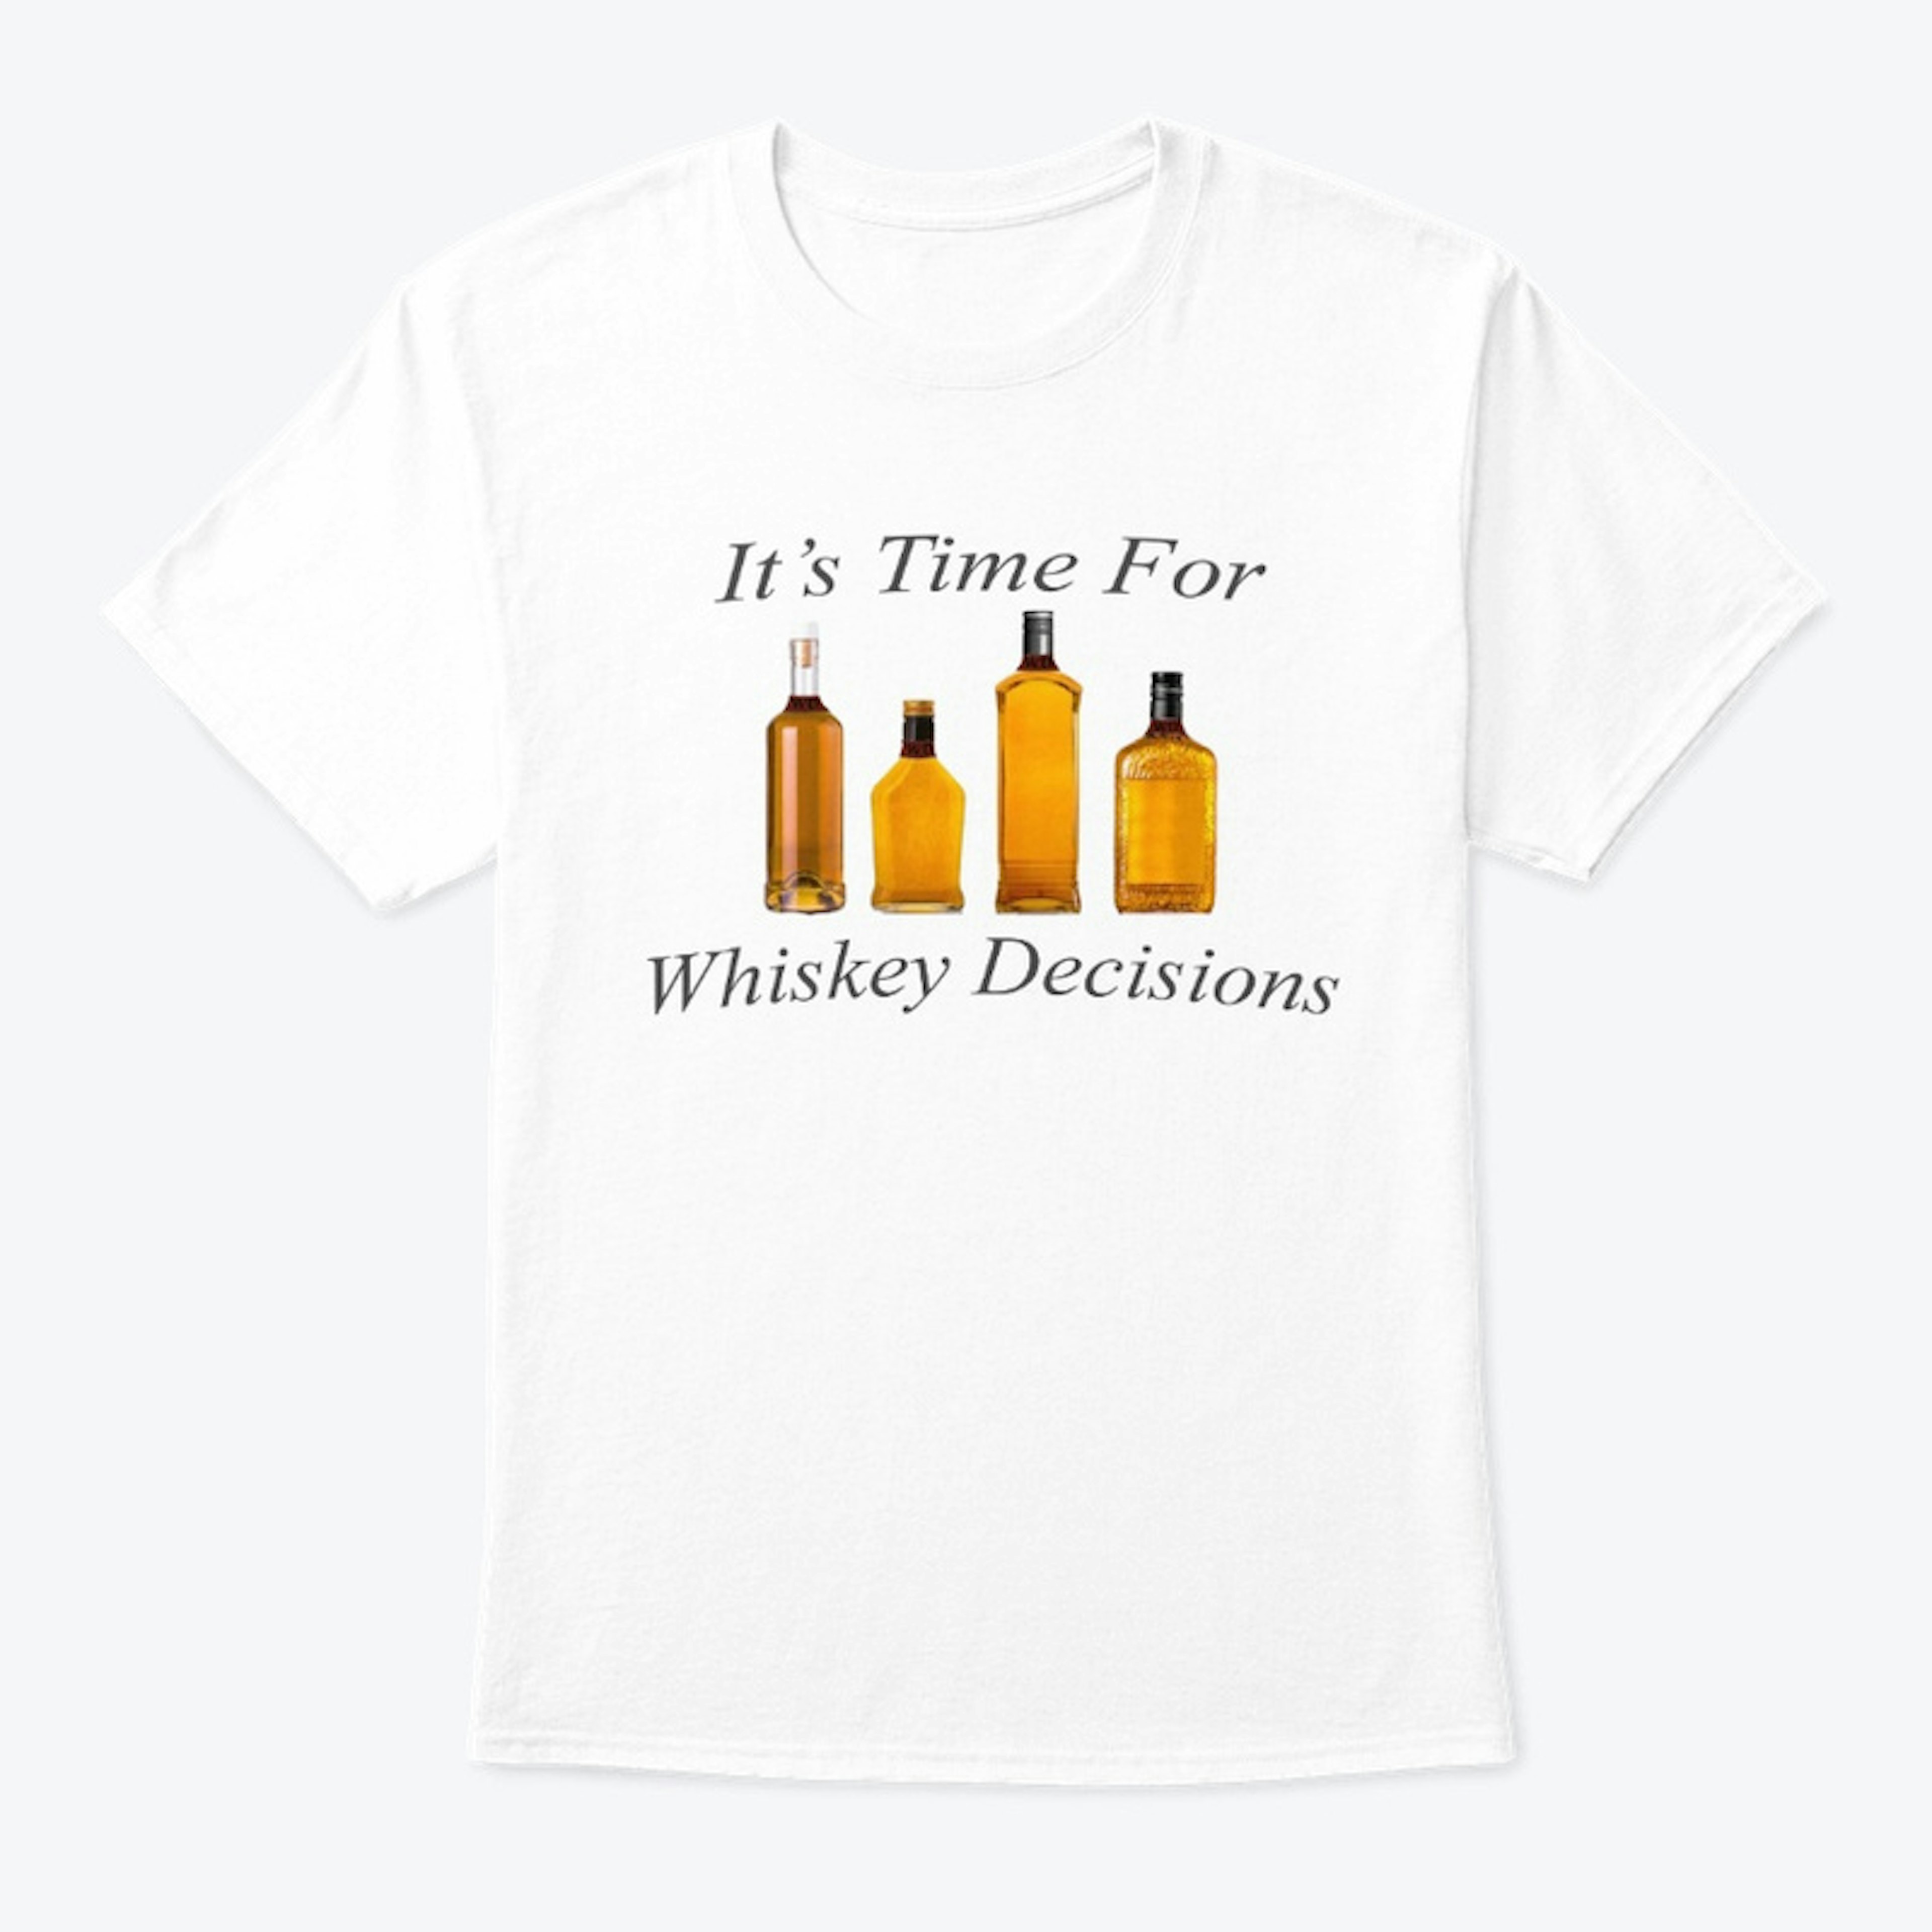 Whiskey Decisions